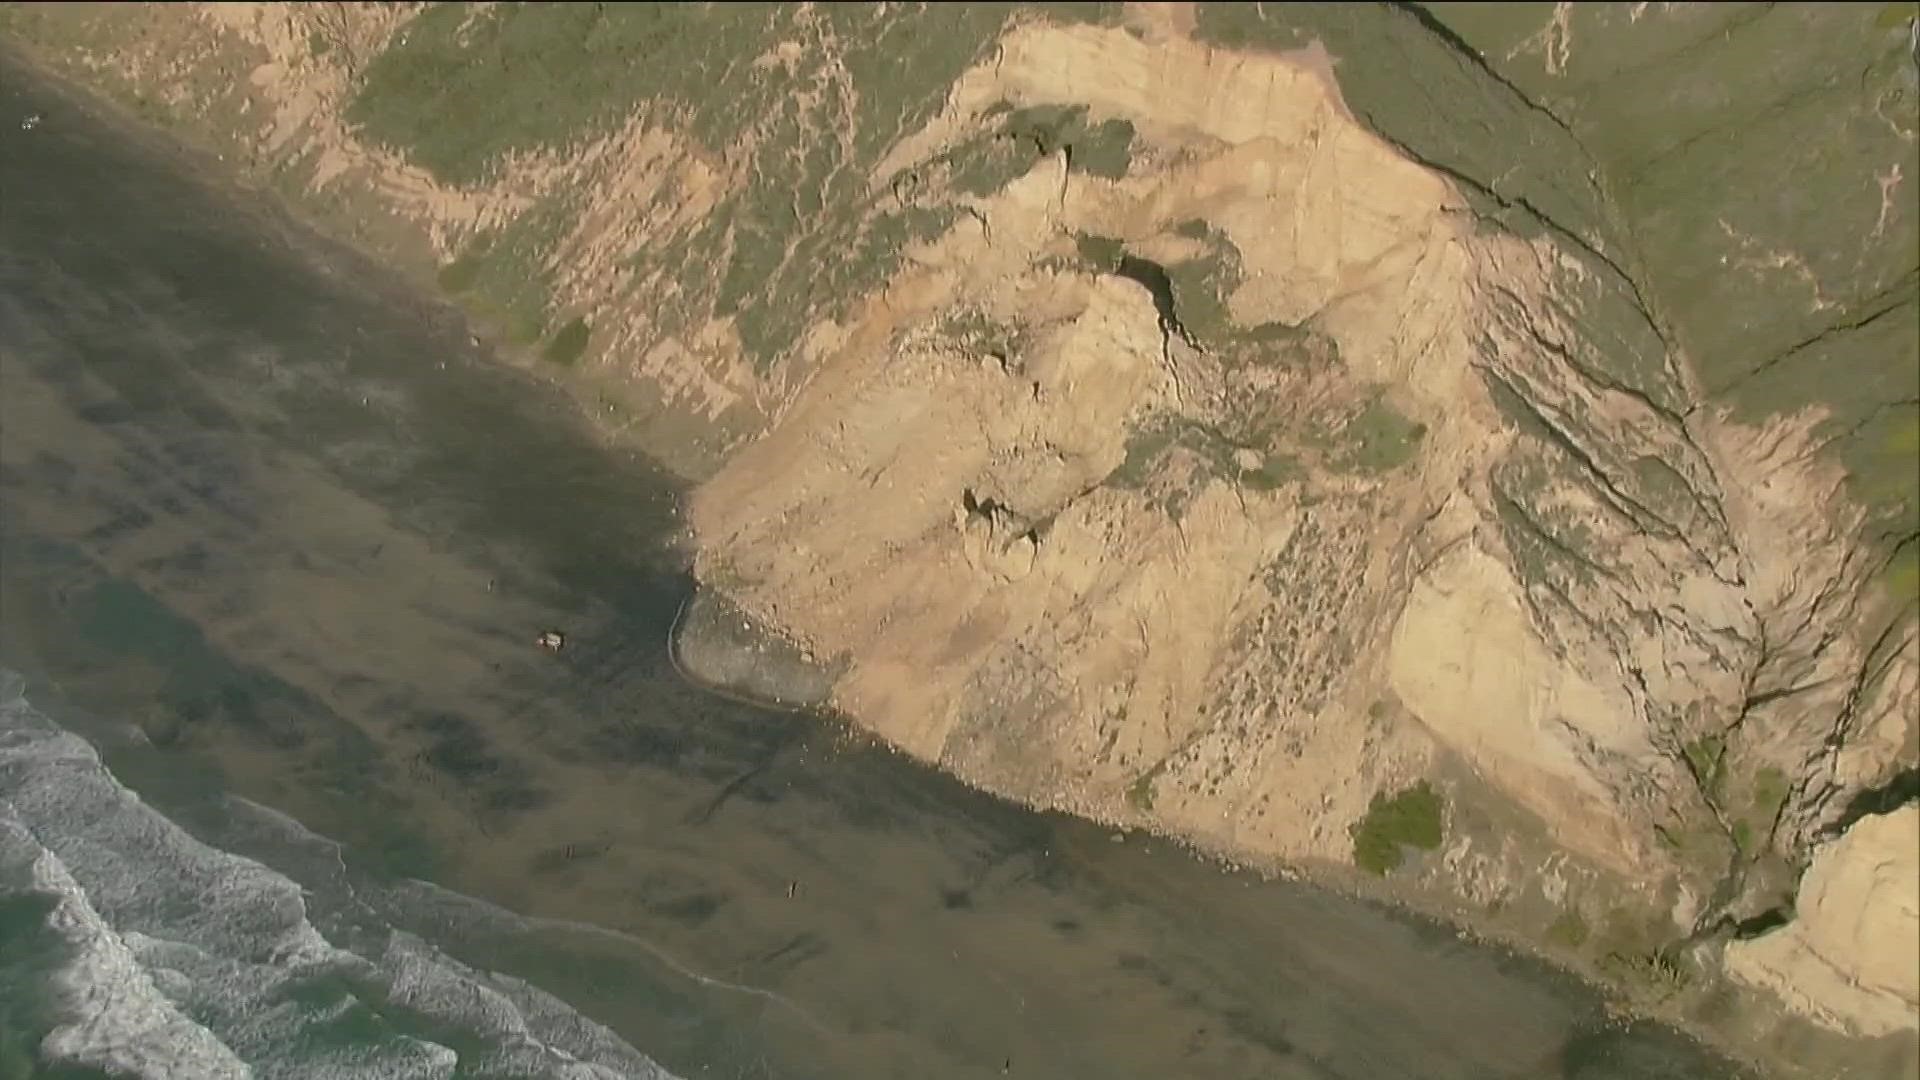 The recent heavy rain and King Tides have made the region's bluffs more unstable. This could be the largest collapse Blacks Beach has seen in 20 years.